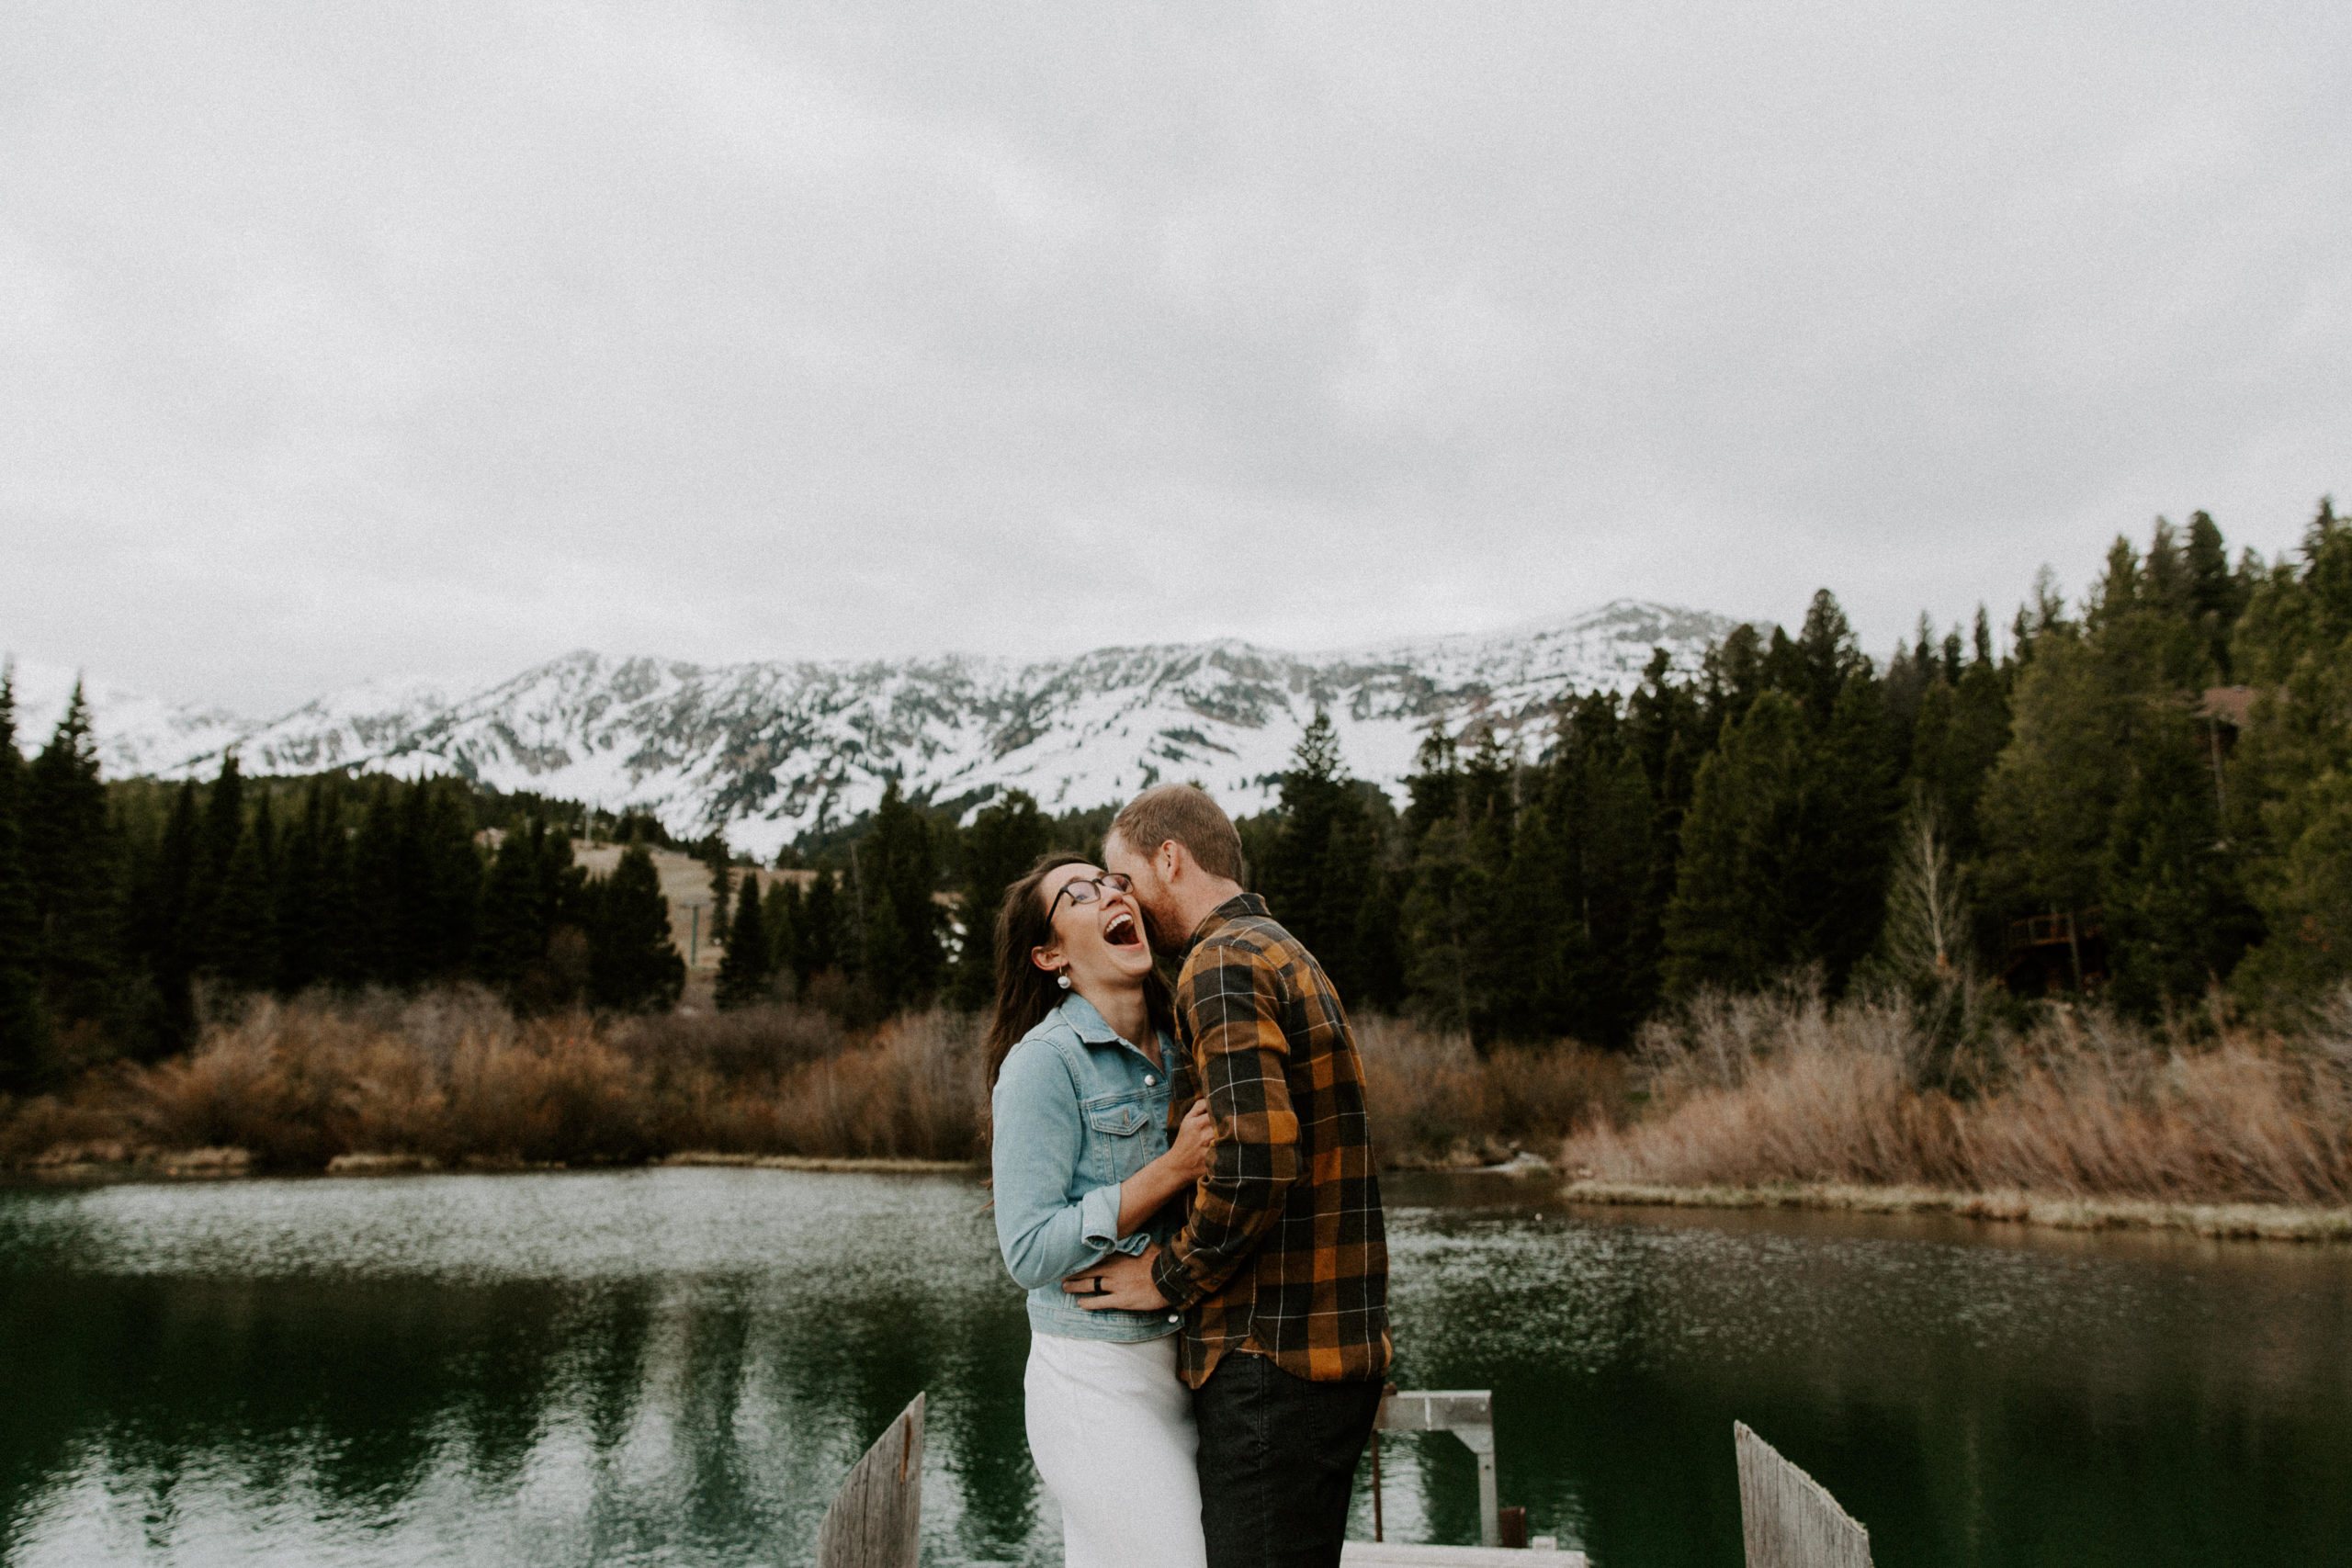 Man whispering into his partners ear as she laughs big with the mountains in the background during their Montana elopement